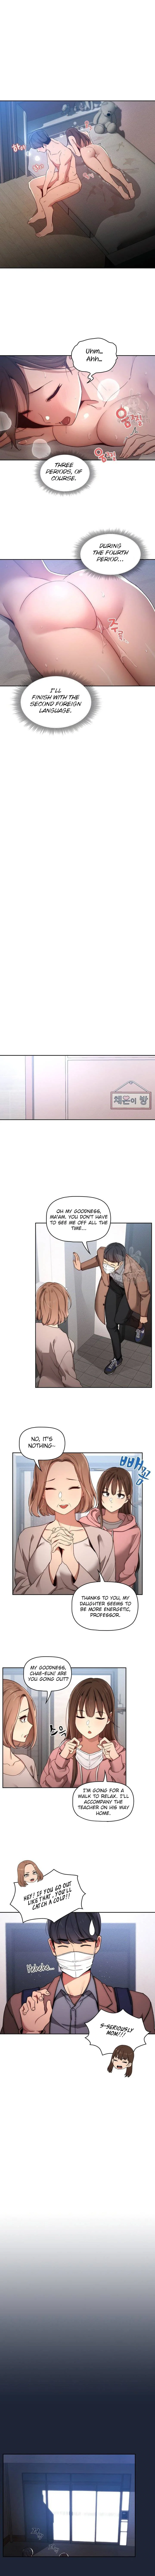 private-tutoring-in-these-trying-times-chap-32-6